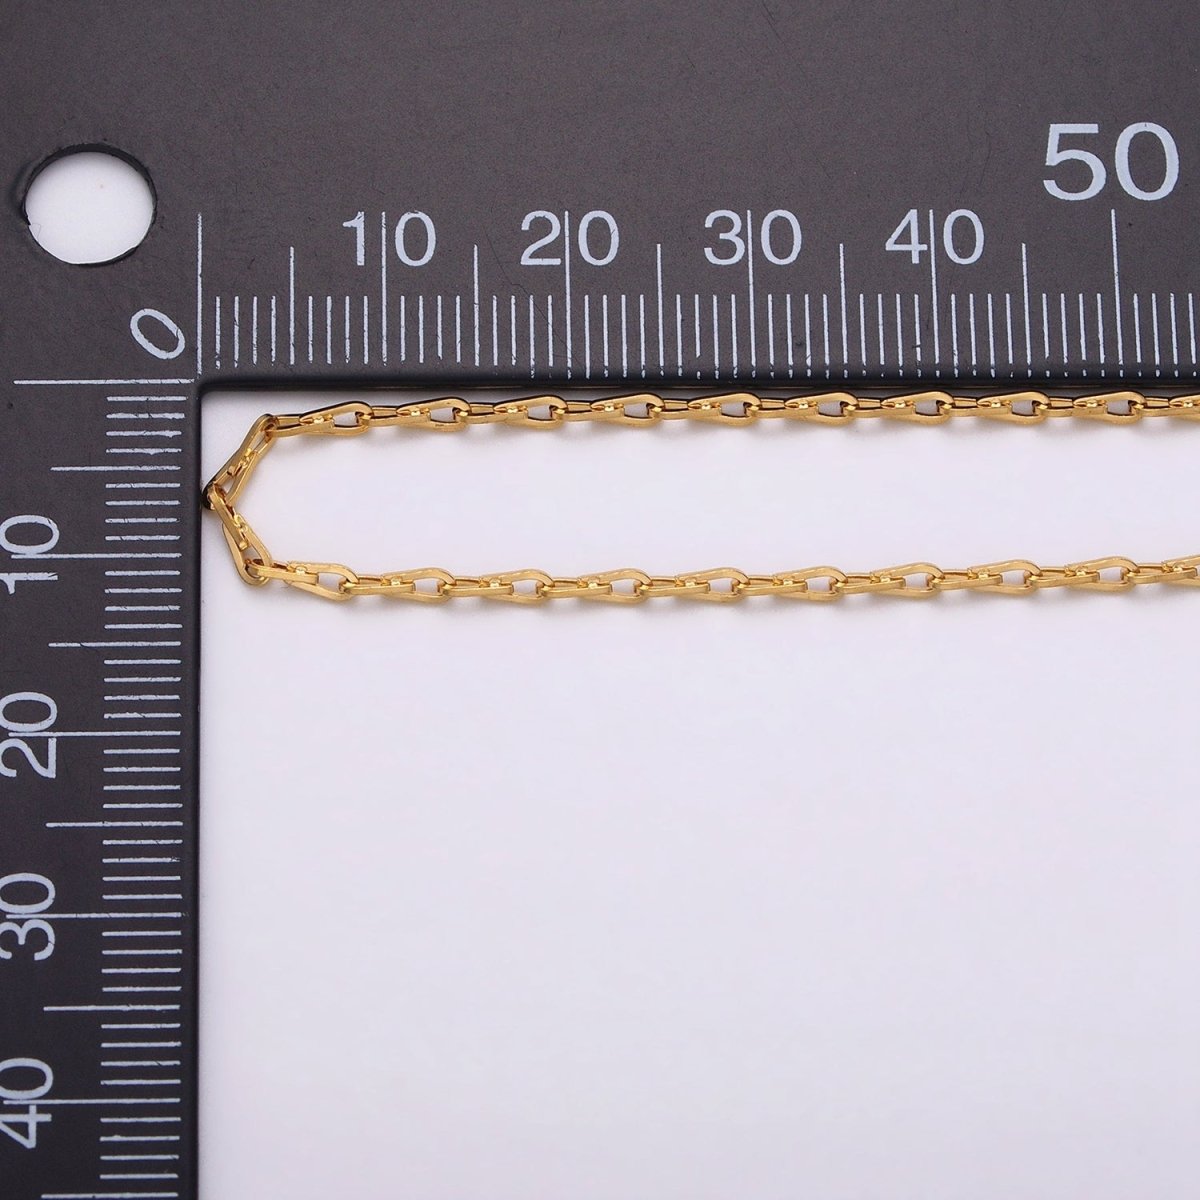 Dainty 16K Gold Filled Ladder Hook Horse Shoe Chain 1.7mm Unfinished chain by Yard Unique Horseshoe Link Chain | ROLL-1267 ROLL-1268 Clearance Pricing - DLUXCA